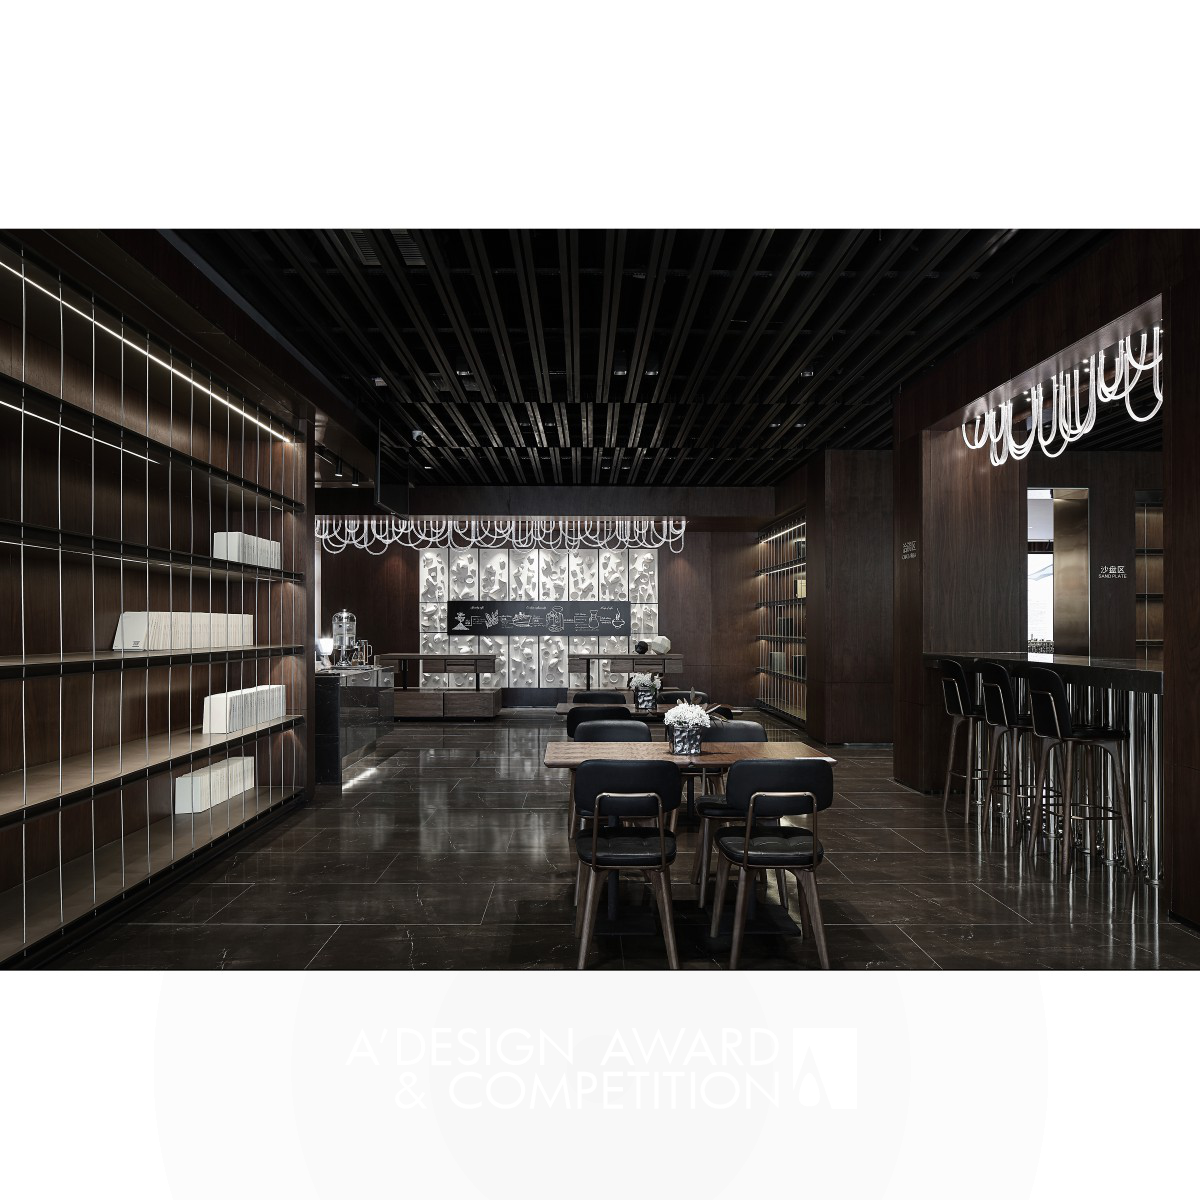 Carving Time Sales Center by Beijing YBY Arts Design Co    Ltd 